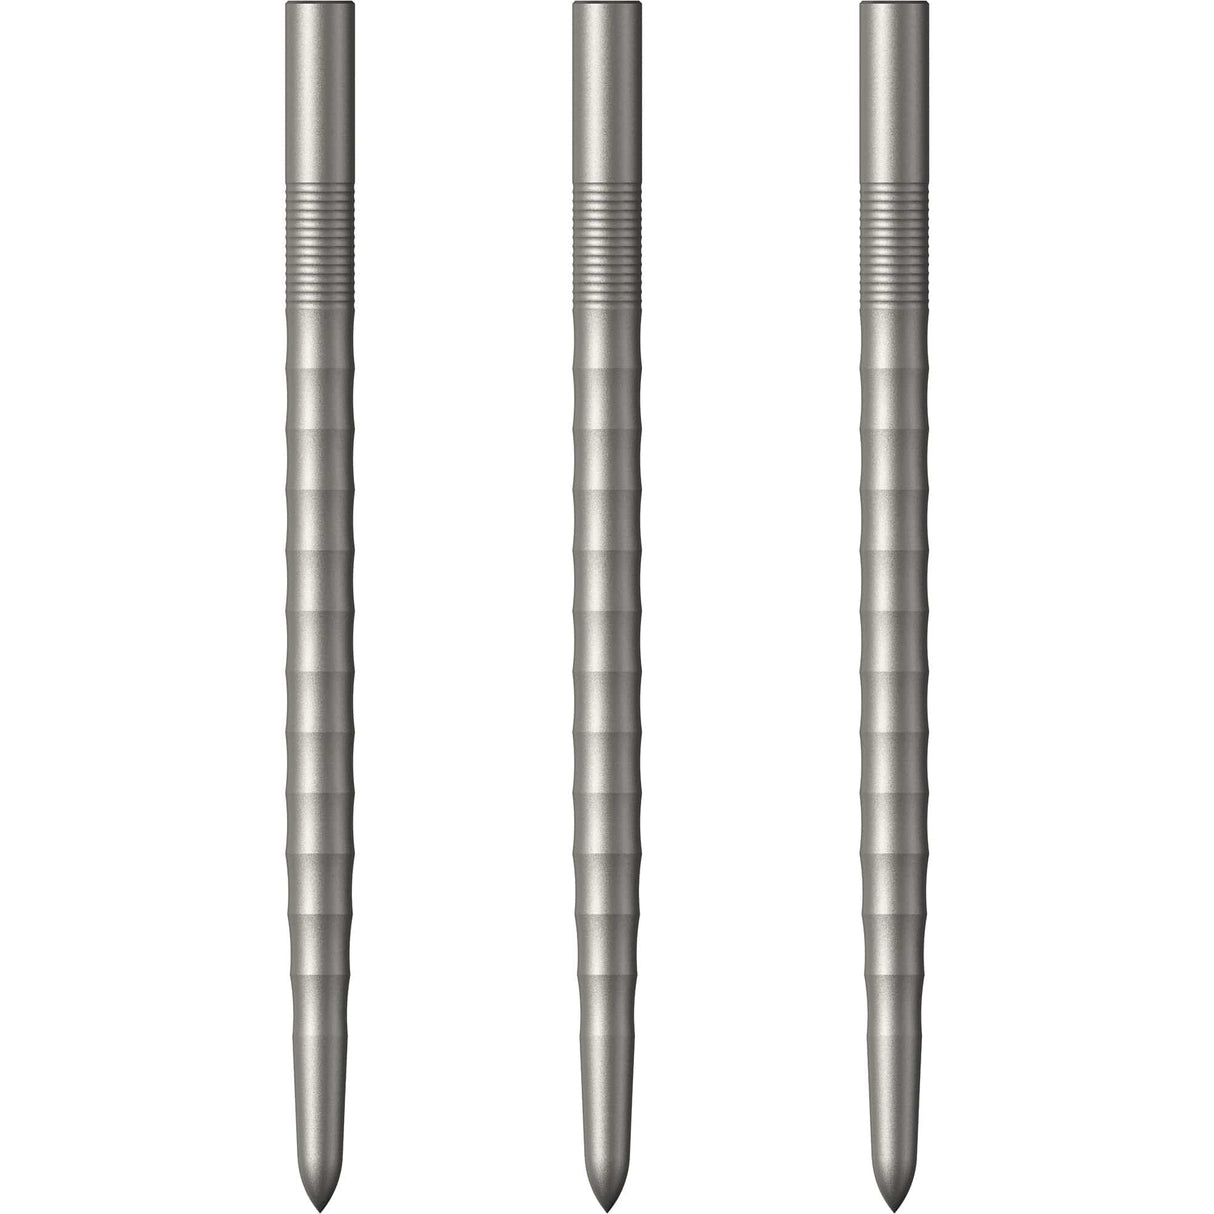 Mission Ripple Dart Points - Steel Tip Replacement Points - Silver 40mm